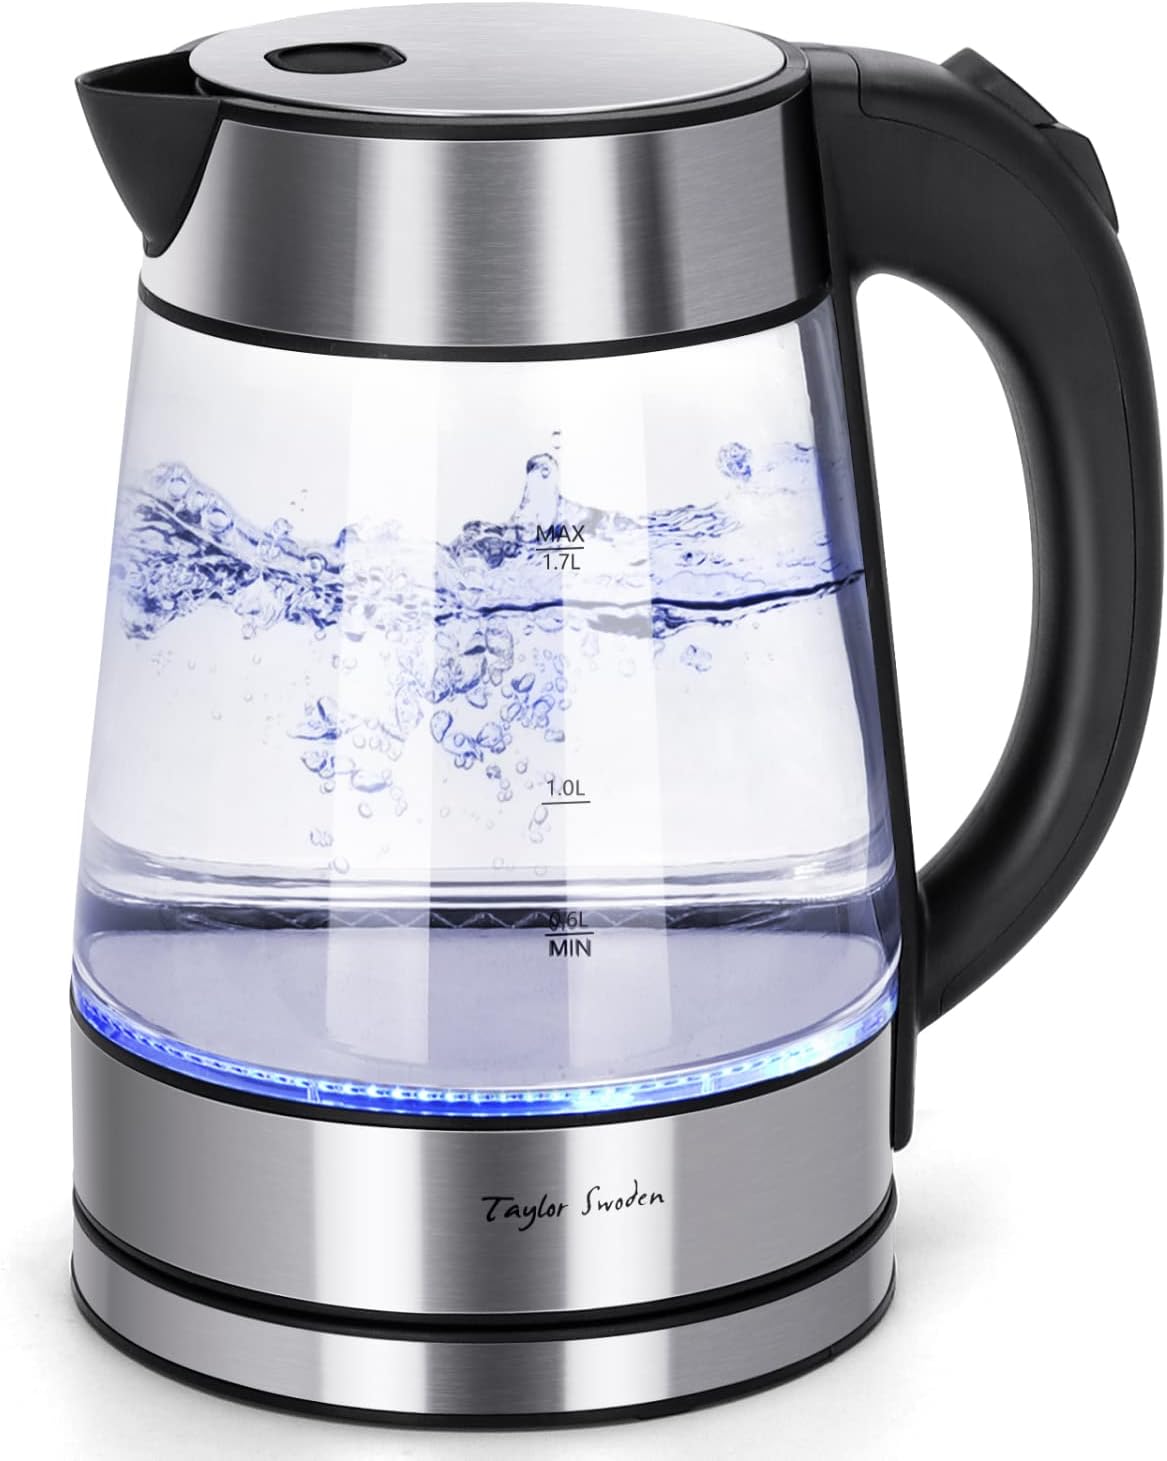 Glass Hot Water Kettle Electric for Tea and Coffee 1.7 Liter Fast Boiling Electric Kettle Cordless Water Boiler with Auto Shutoff Boil Dry Protection Taylor Swoden